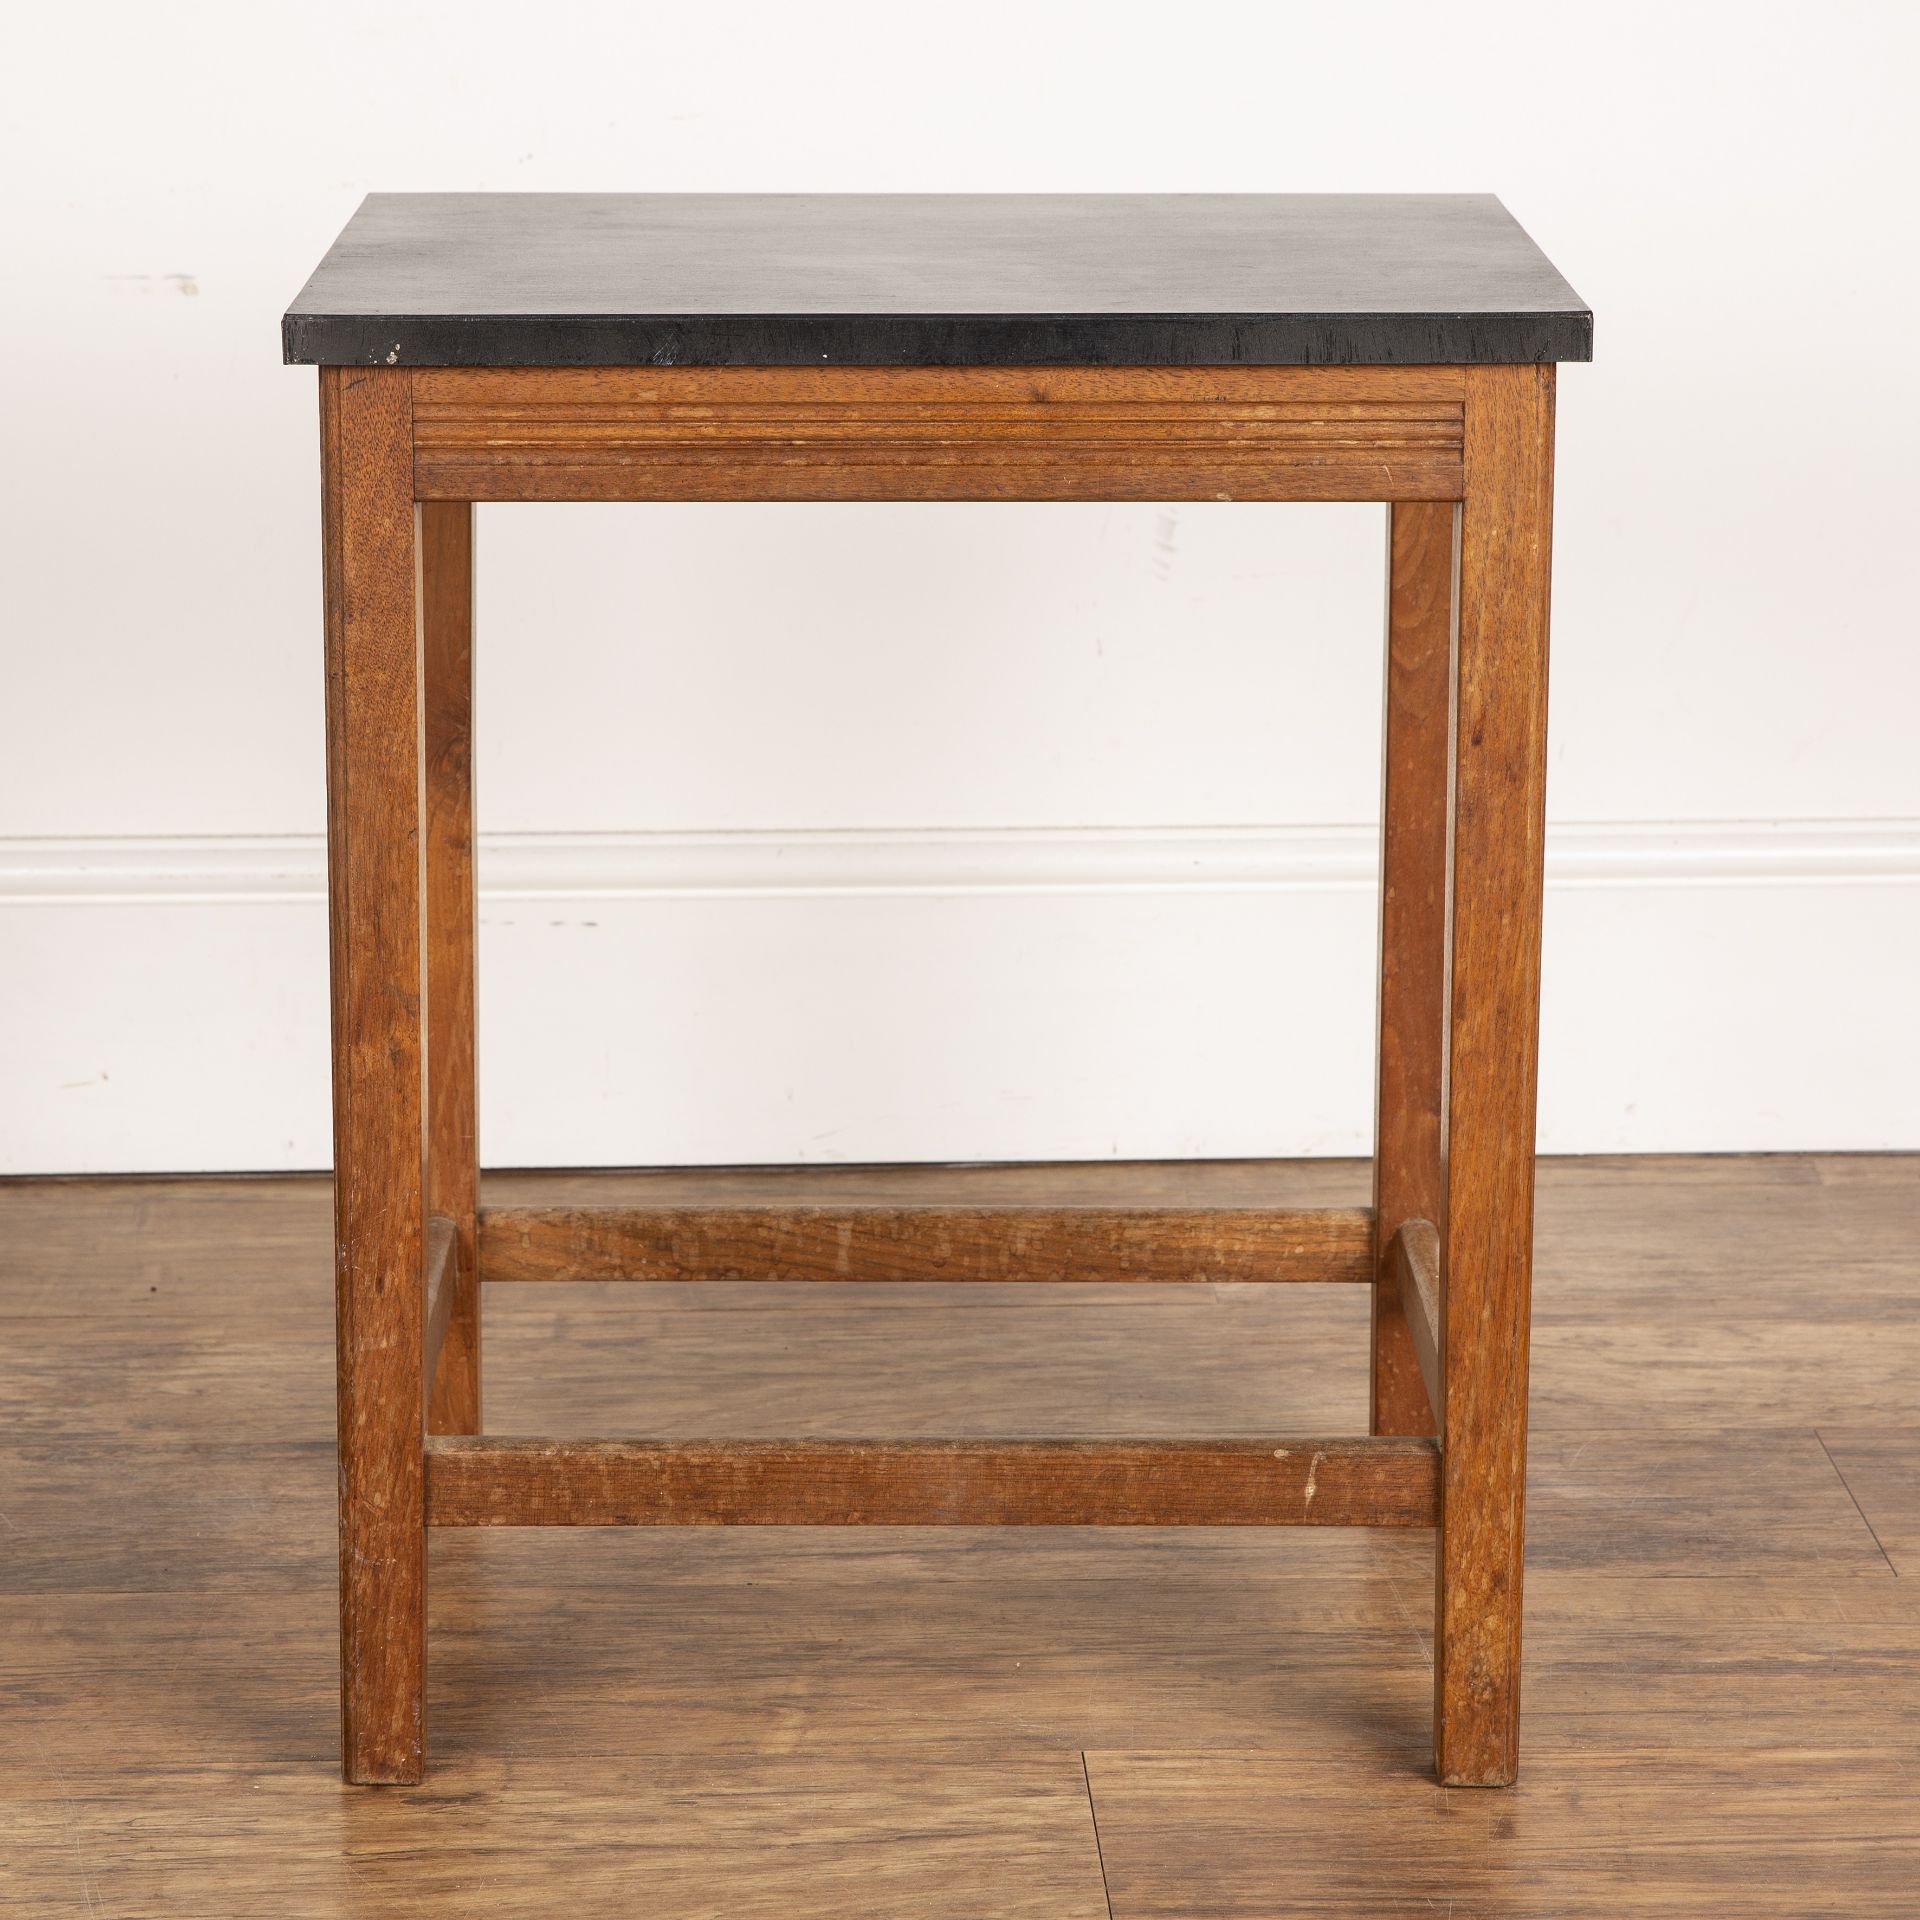 Gordon Russell (1892-1980) of Broadway oak framed table with black rectangular top, with copper - Image 4 of 6